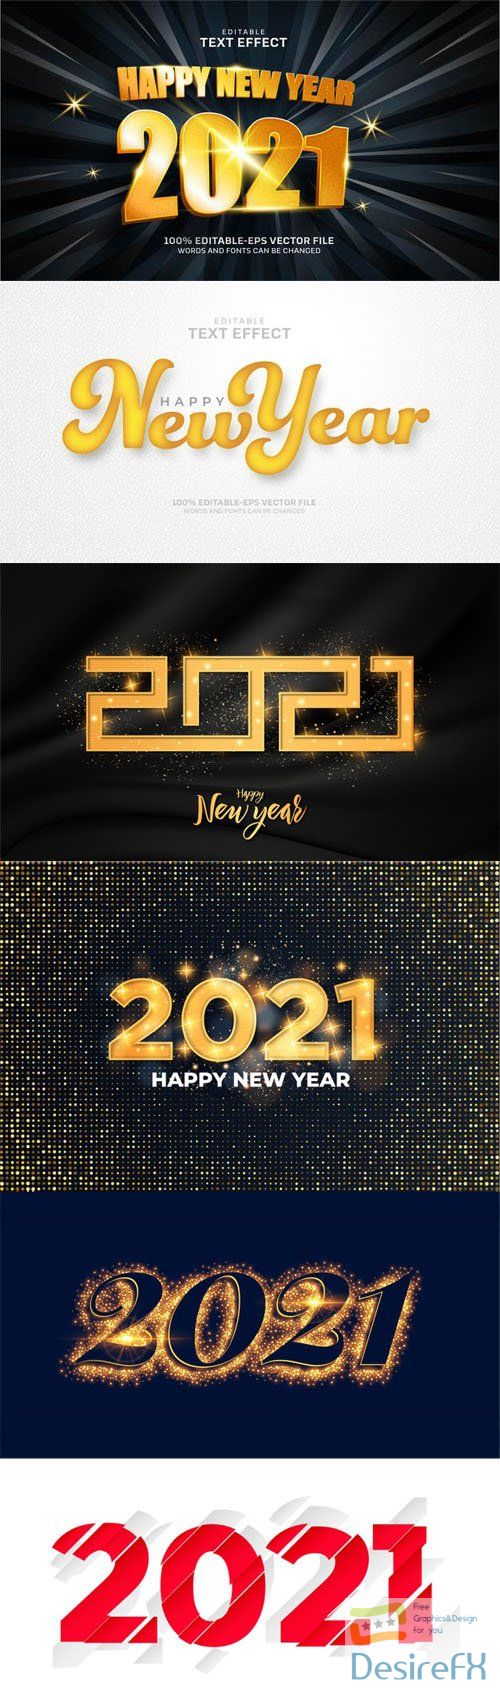 6 New Year 2021 Text Effects Vector Templates